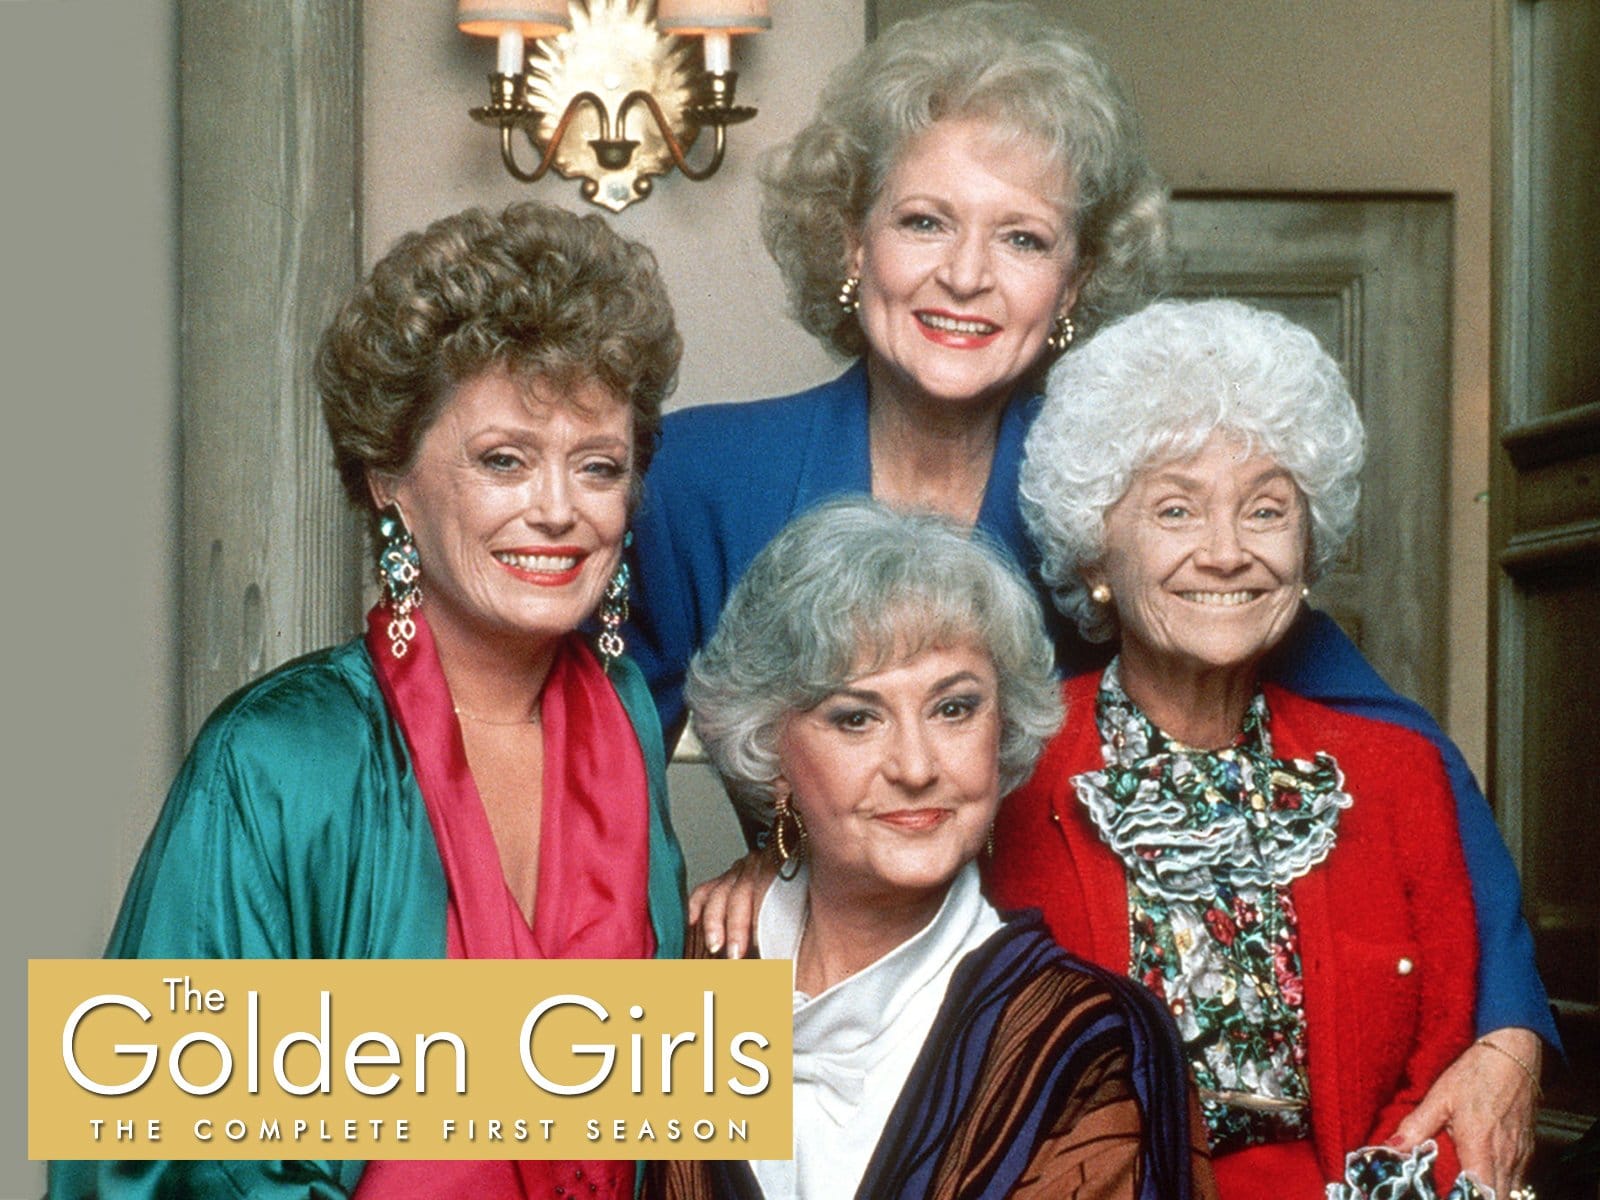 A 'Golden Girls' Flashback — See The Four Leading Ladies Back In 1991